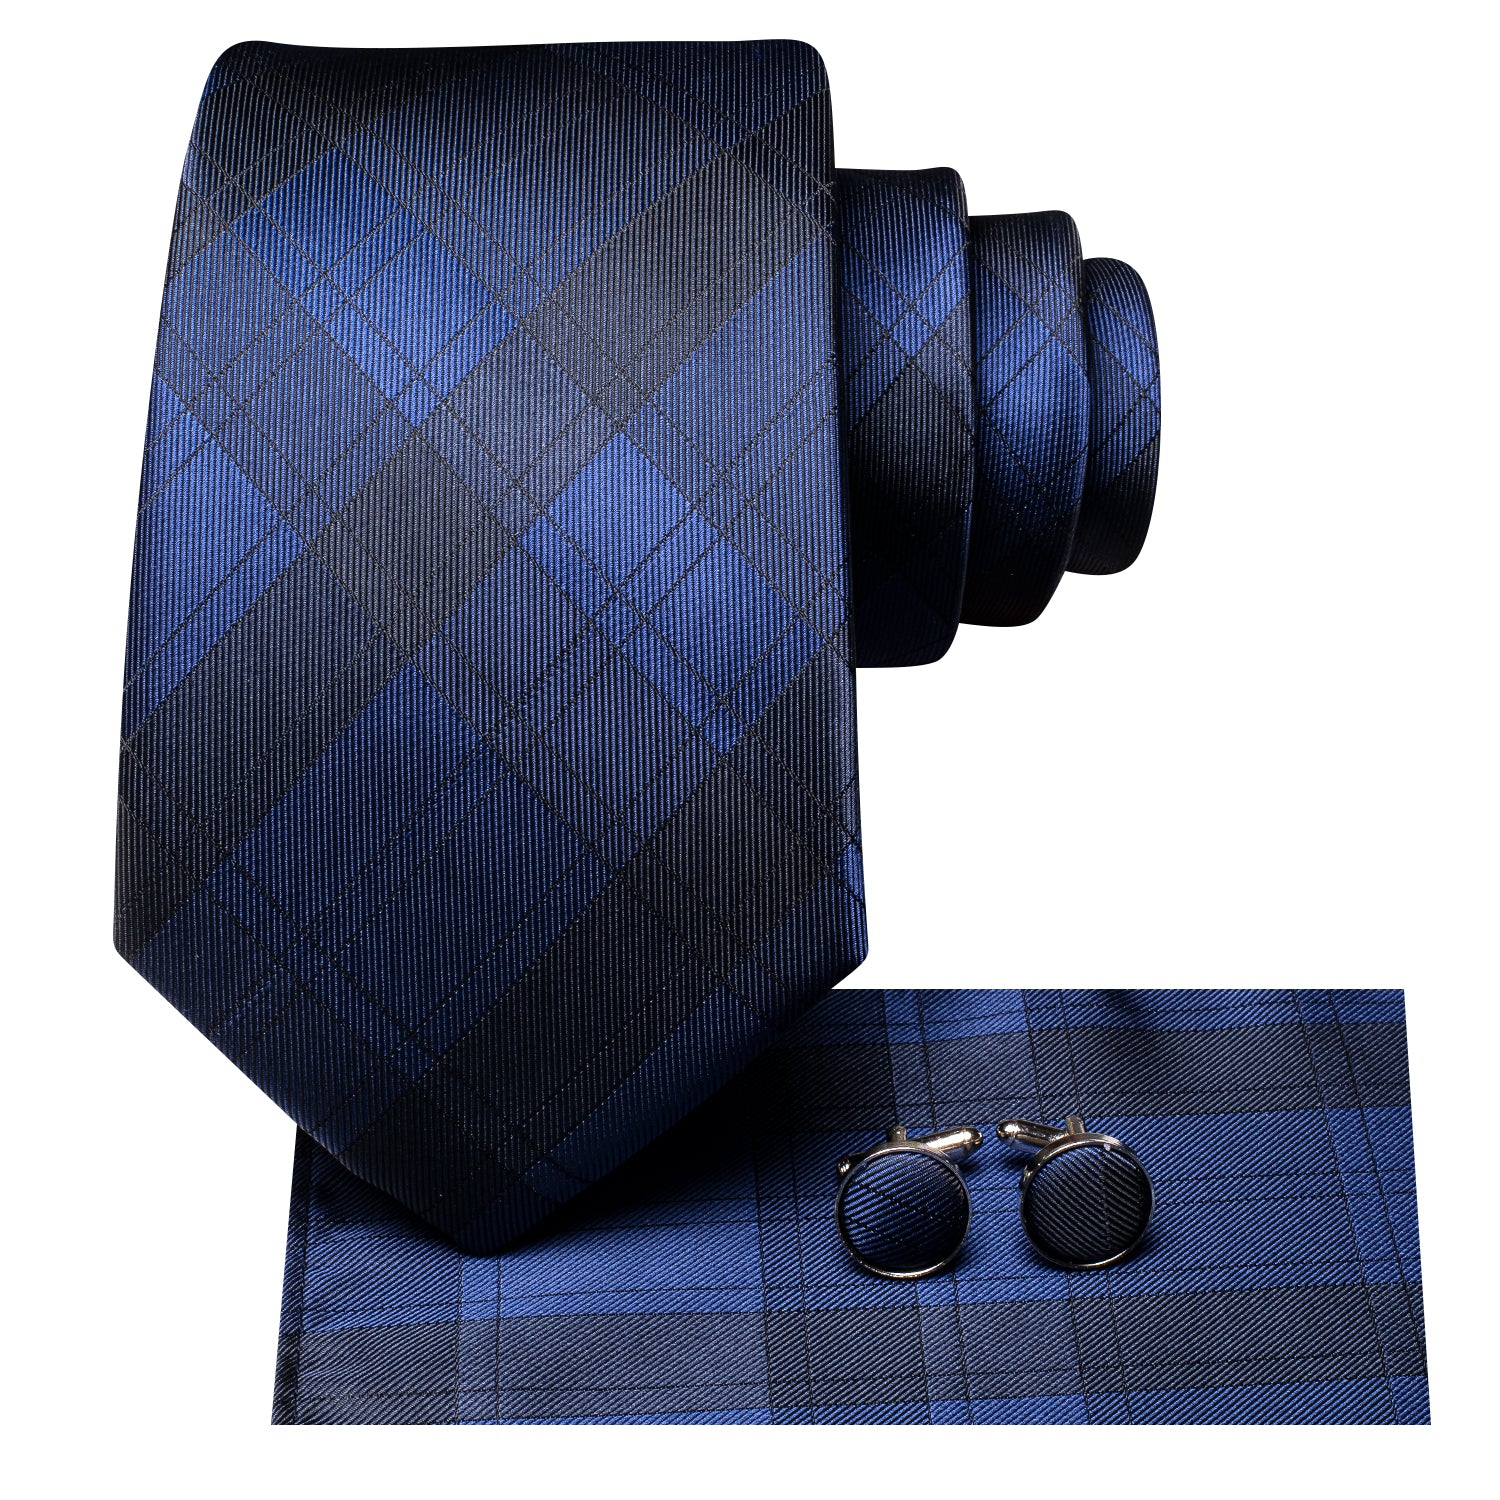 Complete your outfit with the sophistication of this Blue Black Plaid Silk Tie, Pocket Square, and Cufflinks Set